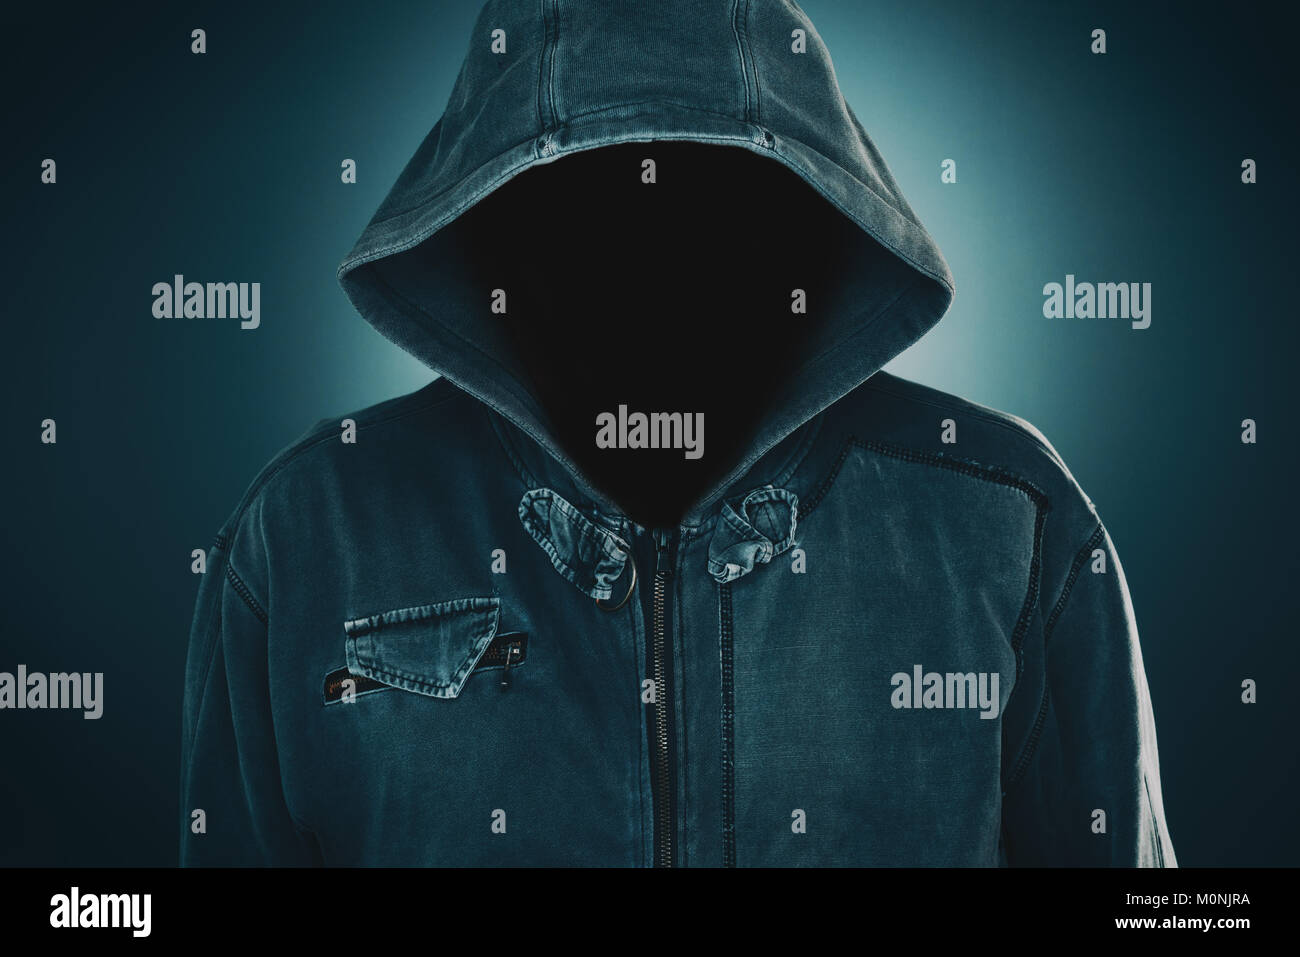 Mysterious suspicious faceless man with hoodie, dark low key portrait for crime and violence concepts Stock Photo